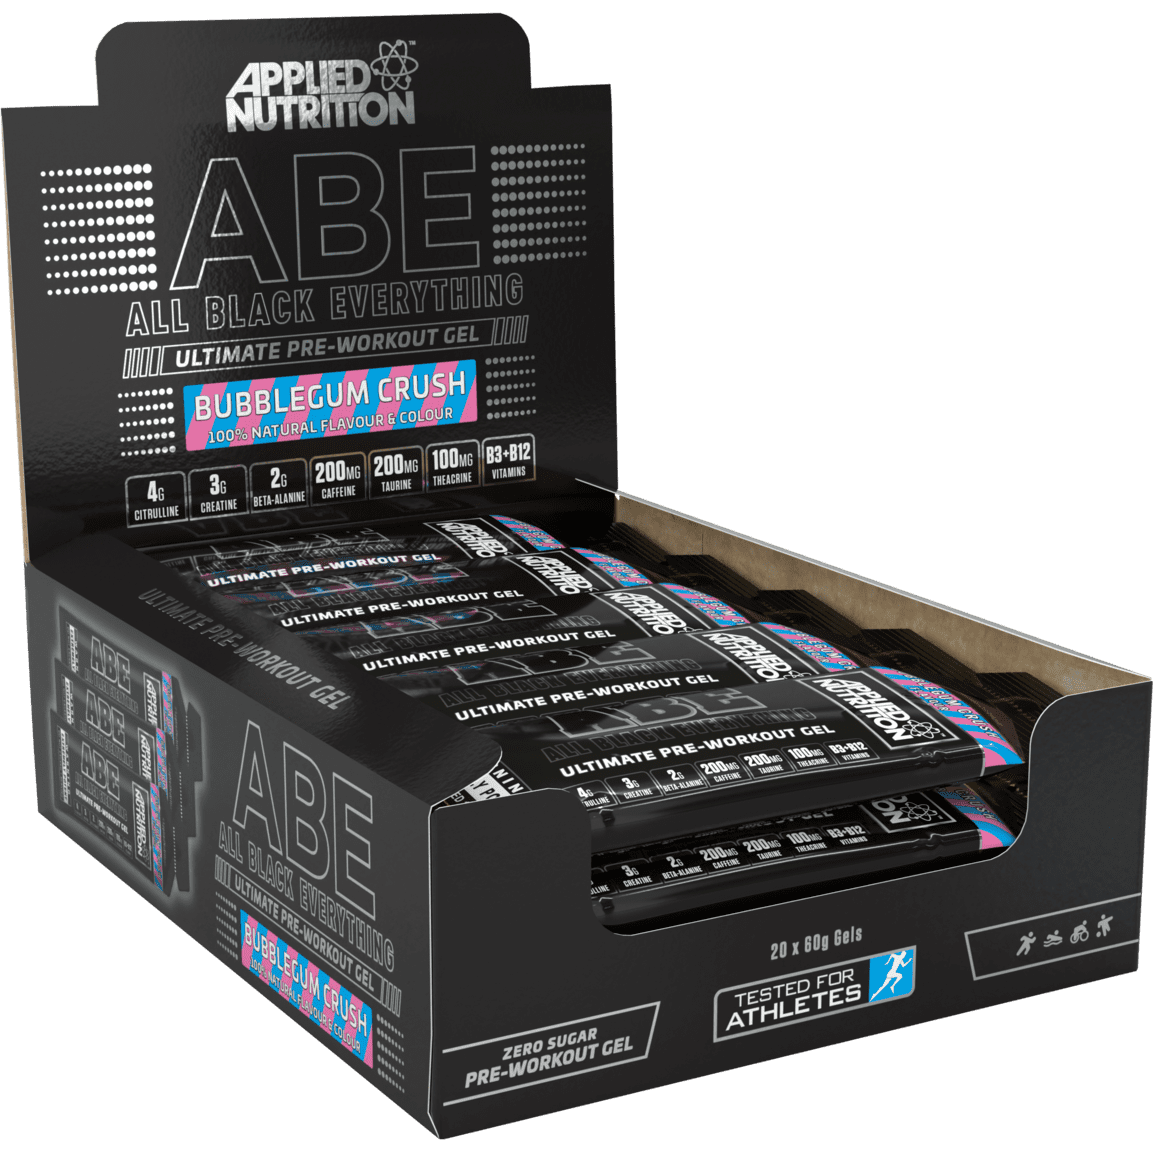 Applied Nutrition ABE Ultimate Pre Workout Gel Box of 20 Pieces Bubblegum